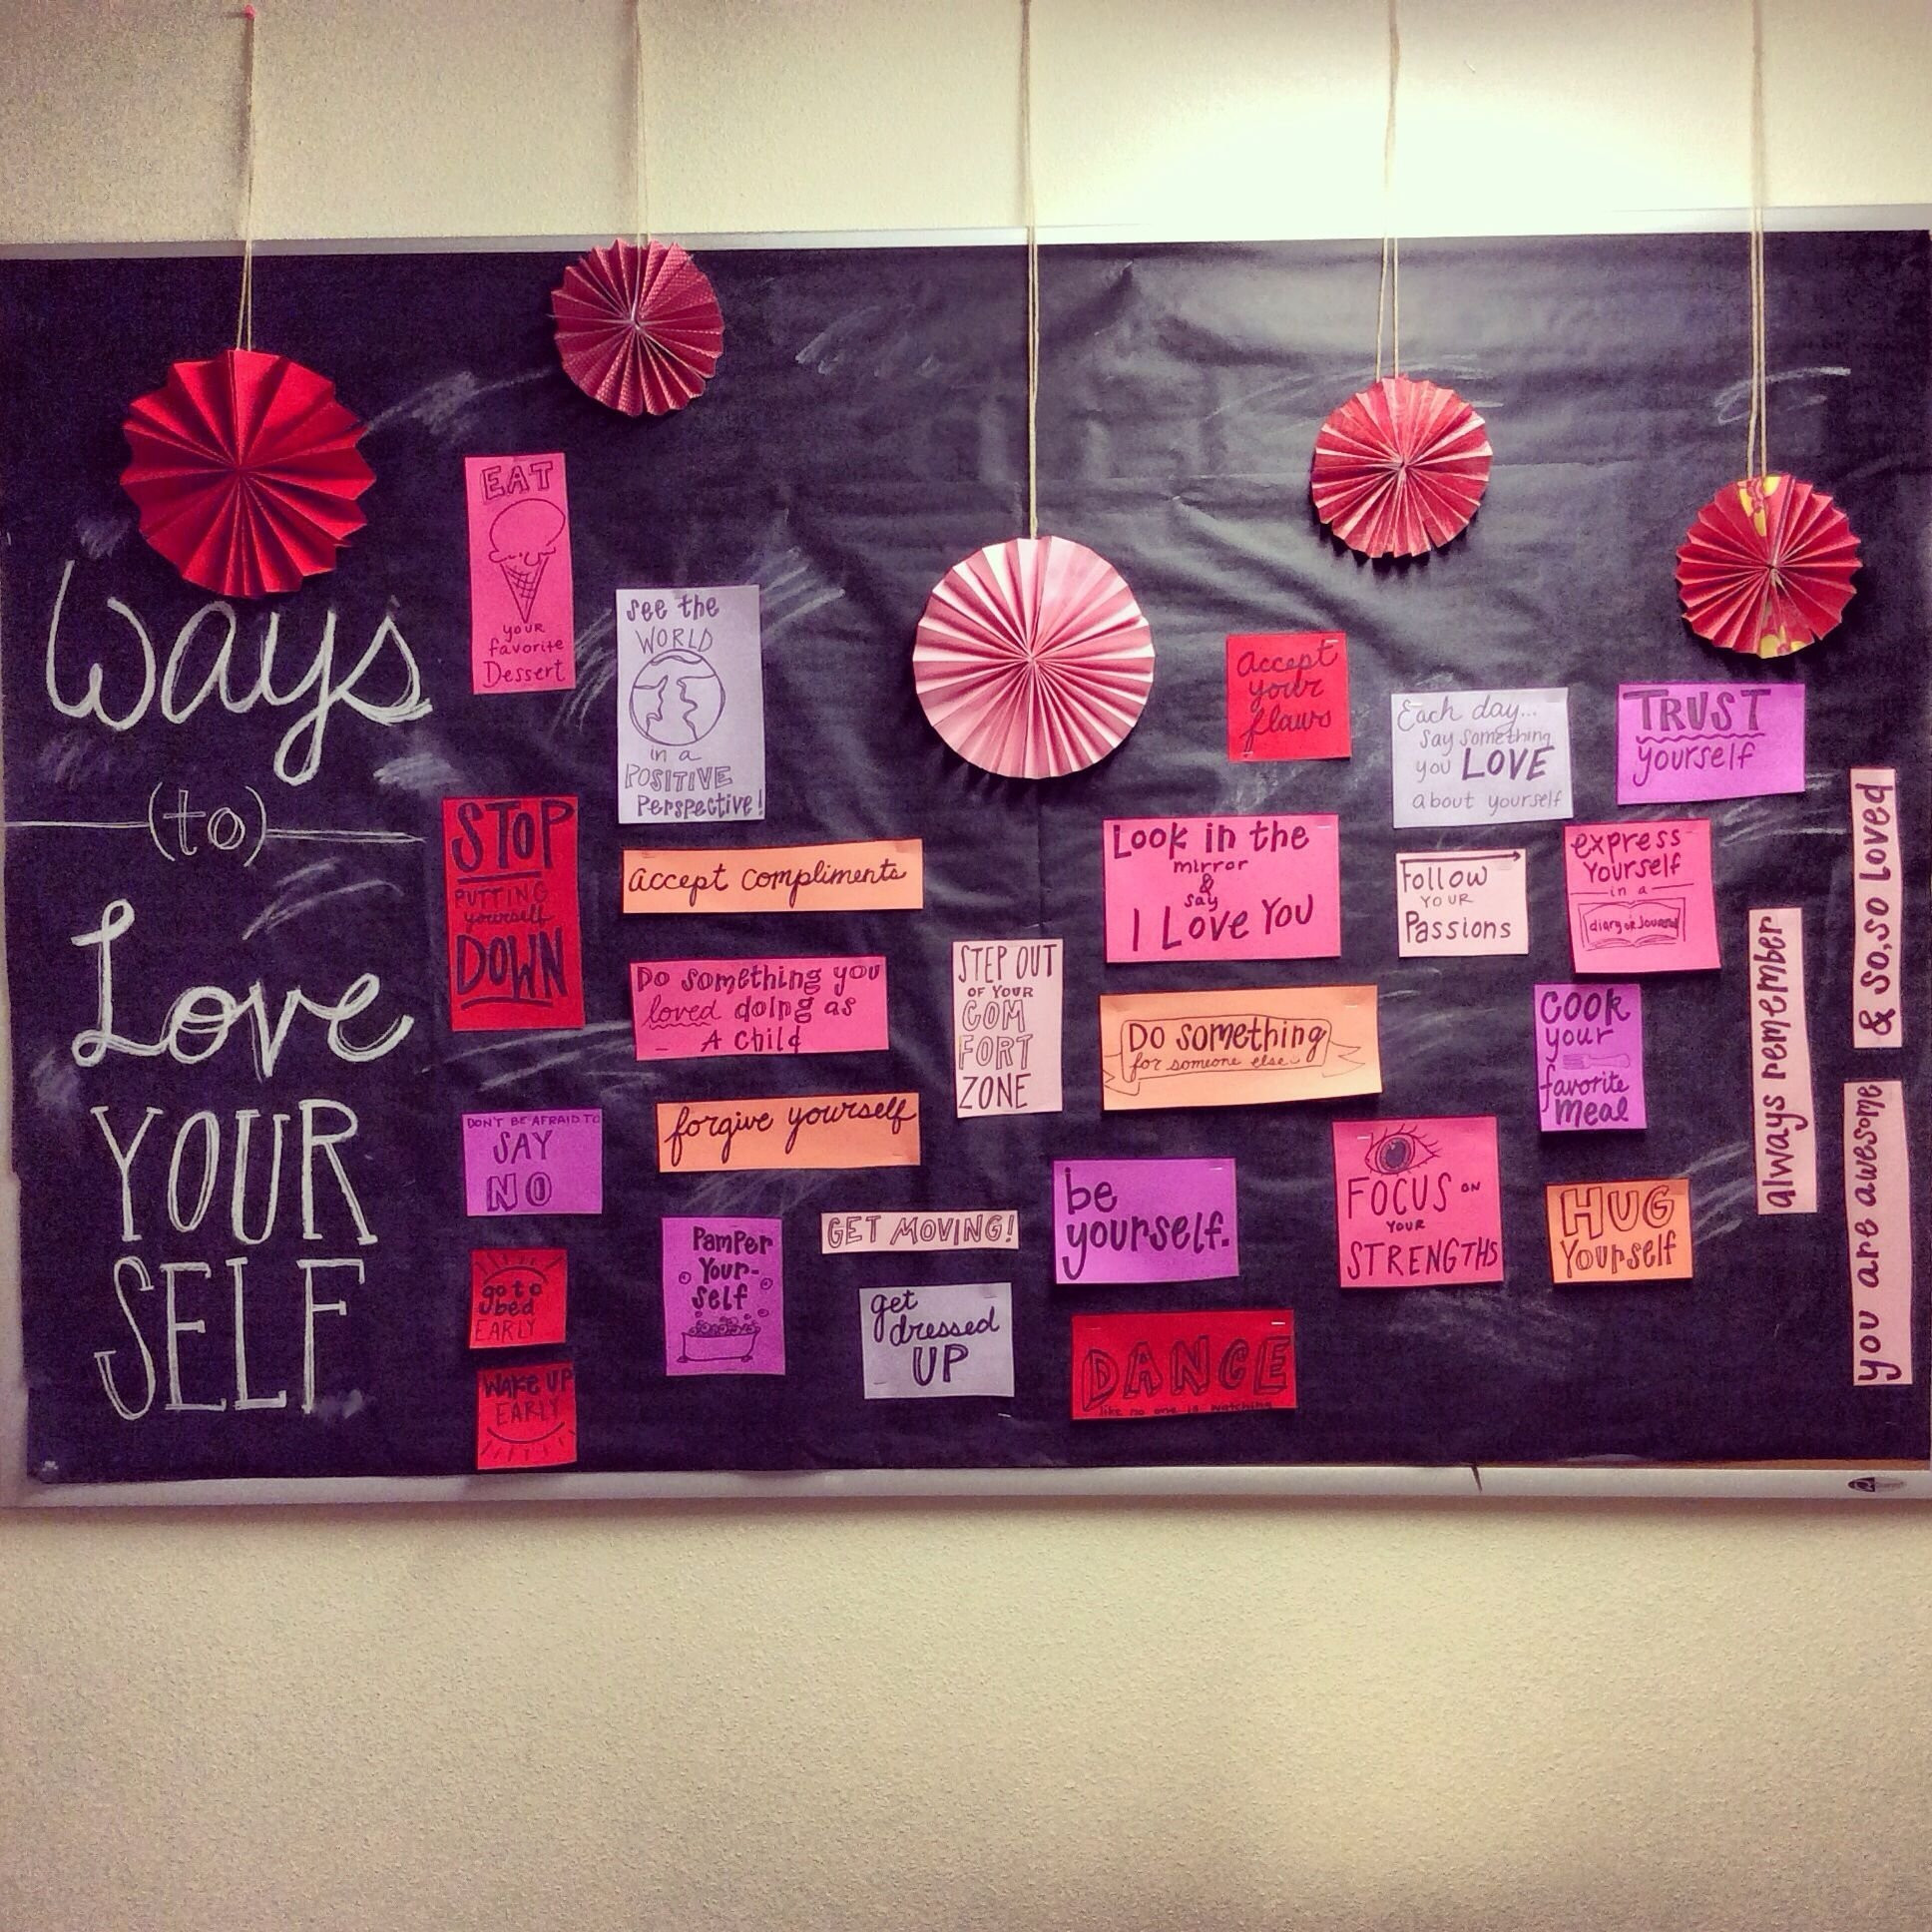 Valentines Day Bulletin Boards Ideas
 10 Great Bulletin Board Ideas For Valentines Day 2020